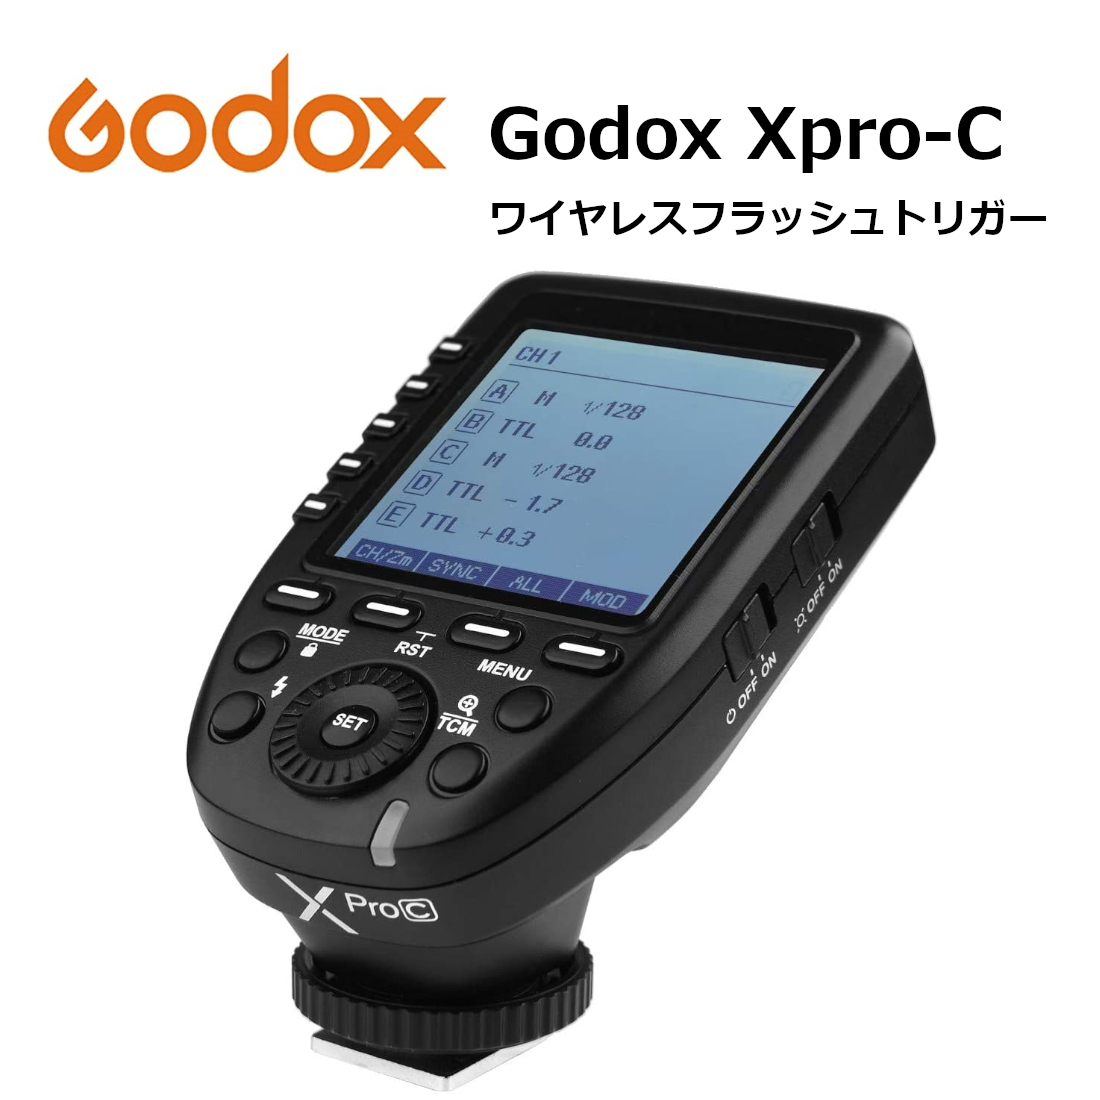  Japan regular agency Godox Xpro-C transmitter TTL 2.4G wireless flash trigger high speed same period 1/8000s large screen LCD screen transmitter compatibility Canon Canon